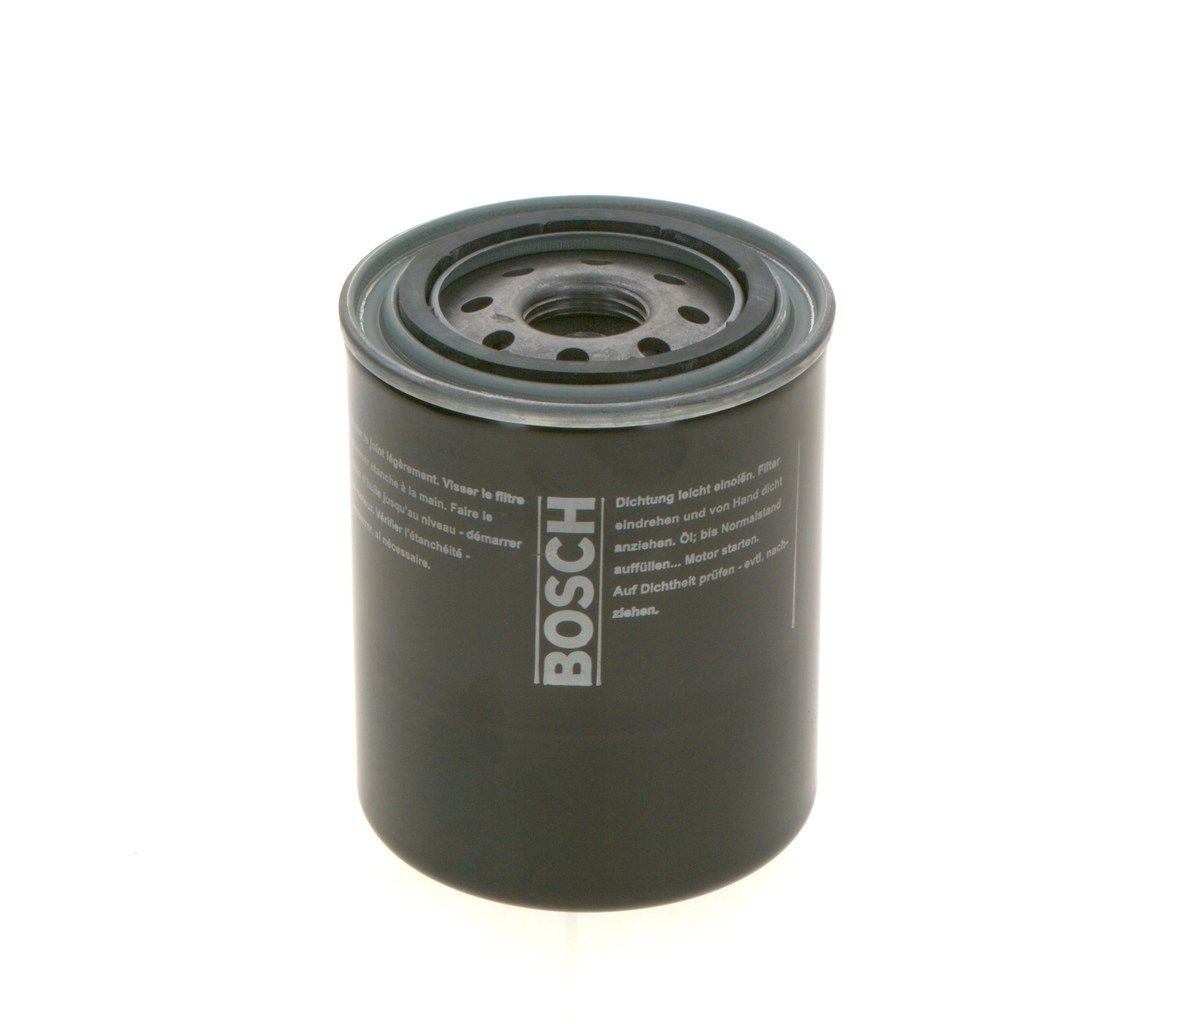 09864B7060 Oil filters BOSCH 0 986 4B7 060 review and test